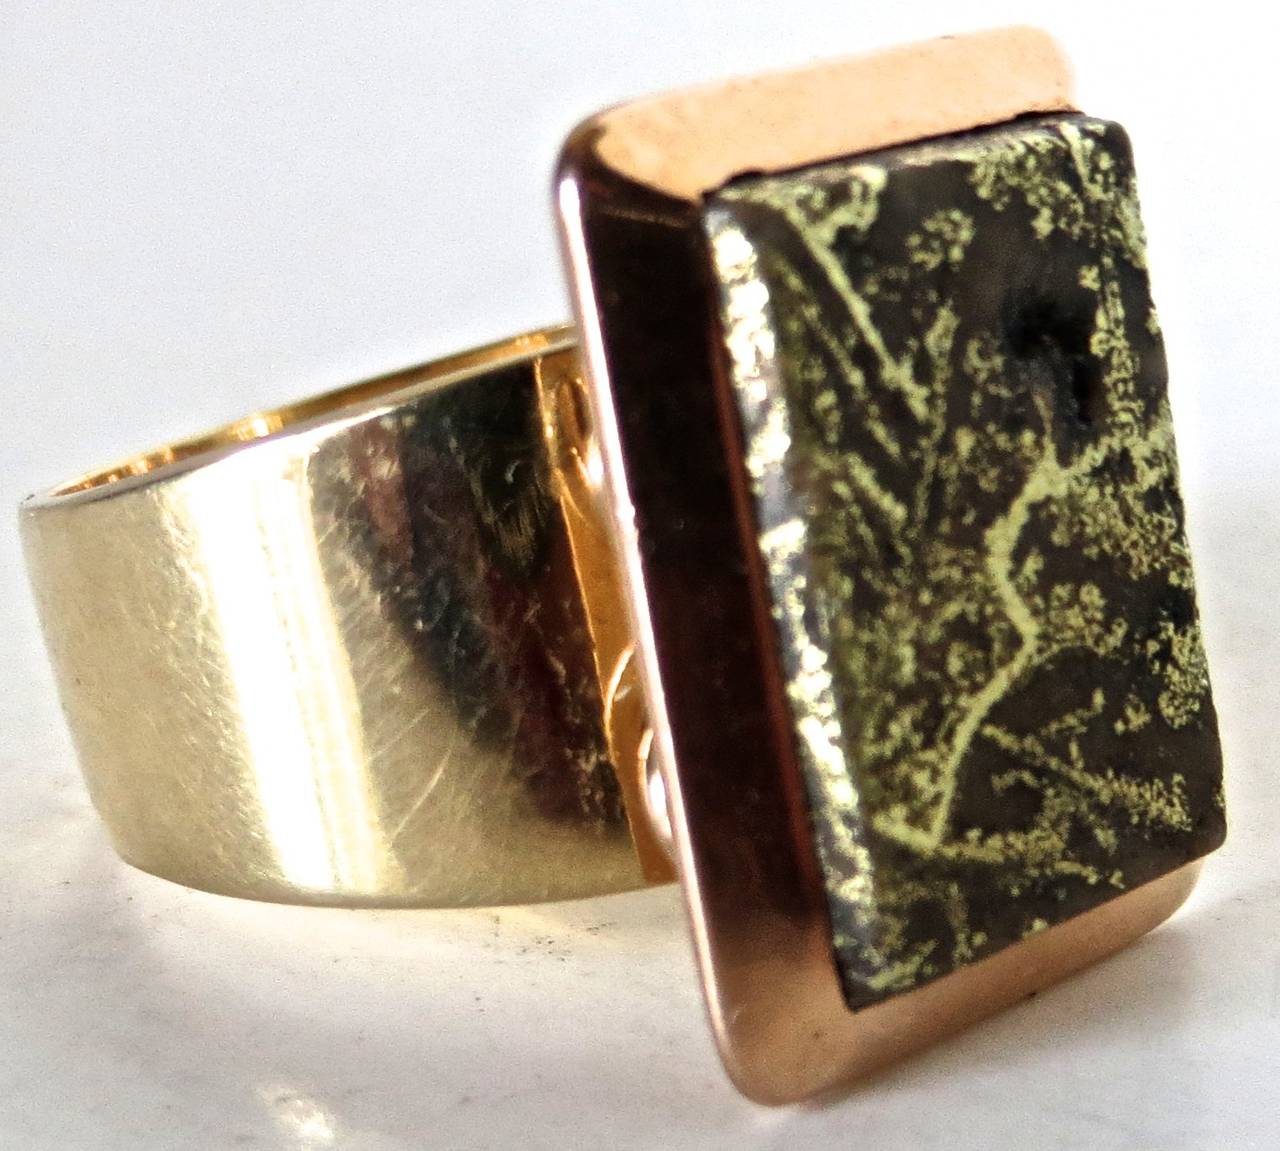 The gold quartz rectangular ring with a beveled 18-carat gold border, circa 1875, and is mounted on a later (contemporary) 14-carat gold band. It is a large size man's ring and is very attractive. The 14-carat gold band tapers from 1/2